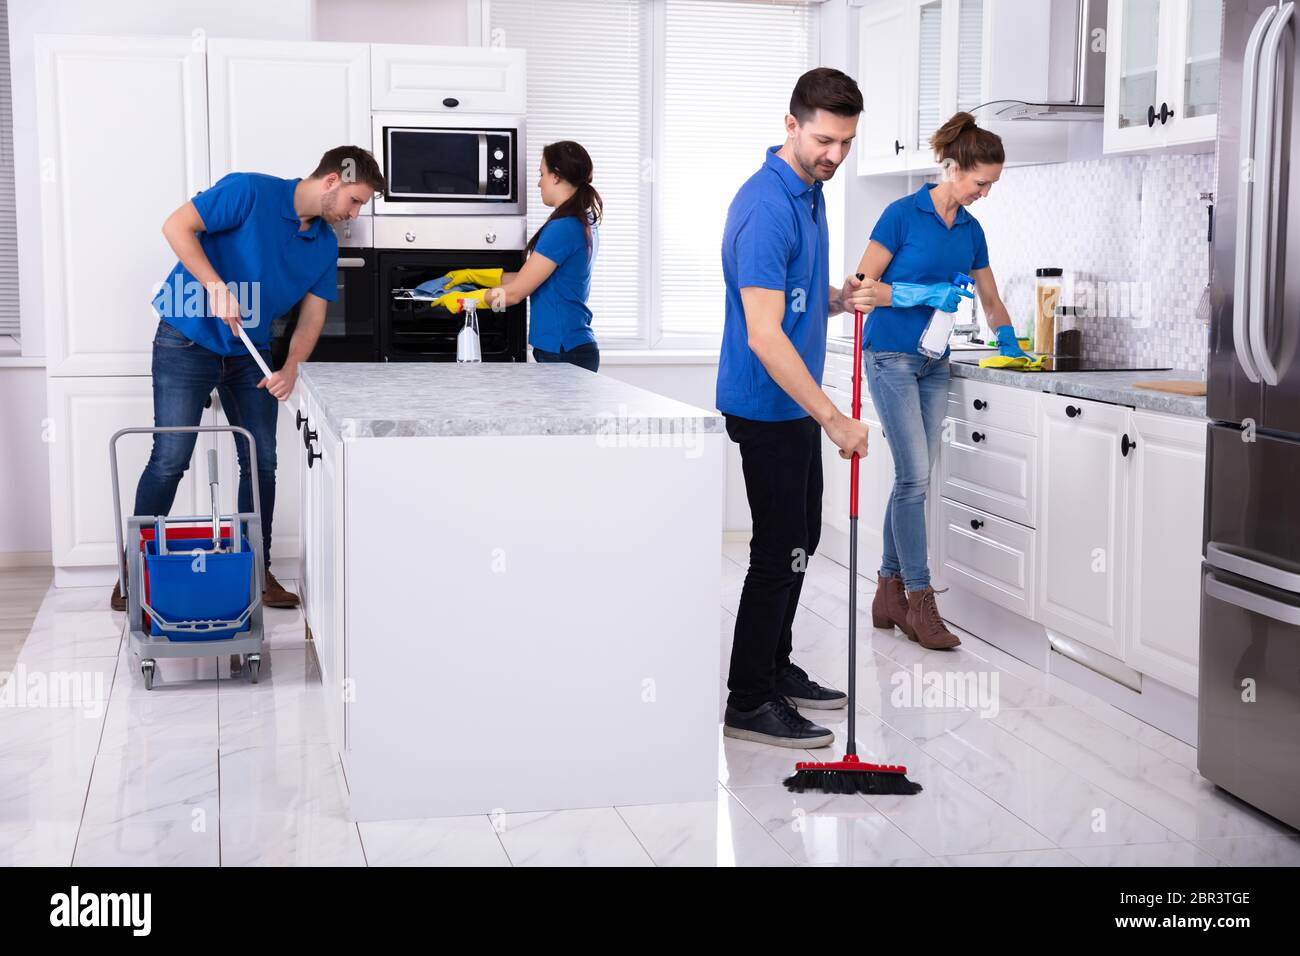 Group Of Young Janitors In Uniform Cleaning Kitchen At Home Stock Photo